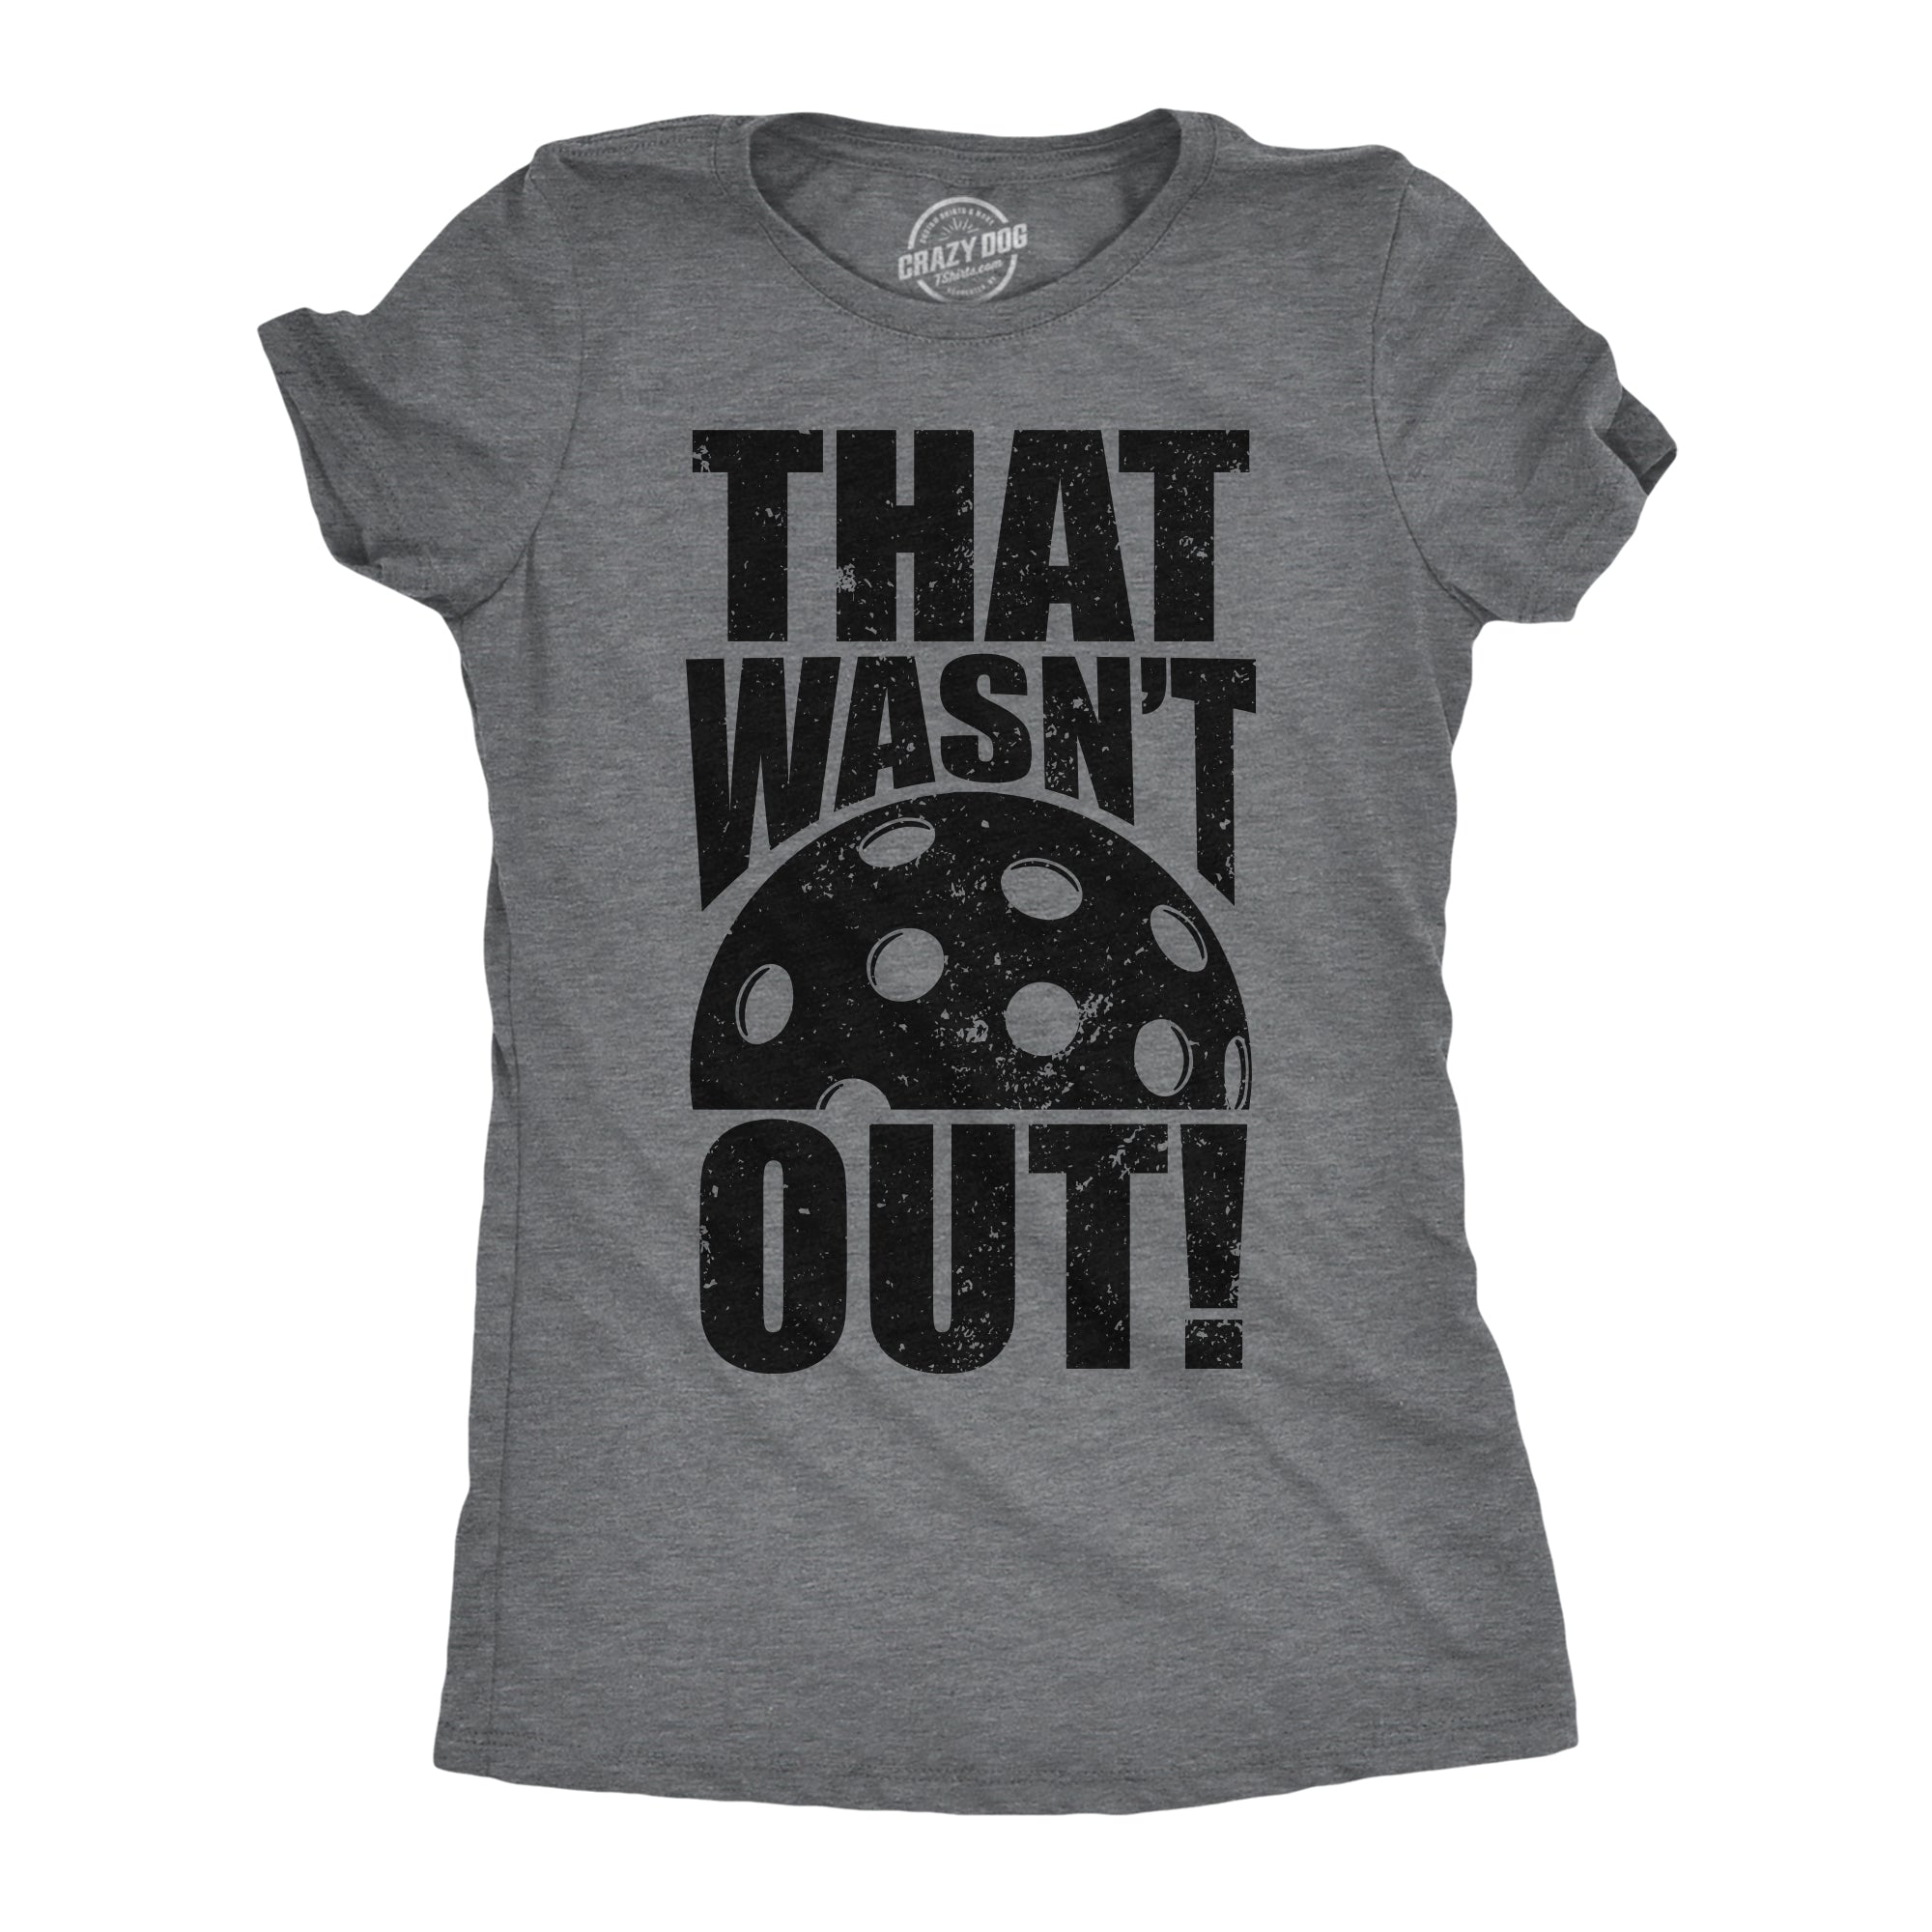 Funny Dark Heather Grey - That Wasn't Out That Wasnt Out Womens T Shirt Nerdy Sarcastic Tee